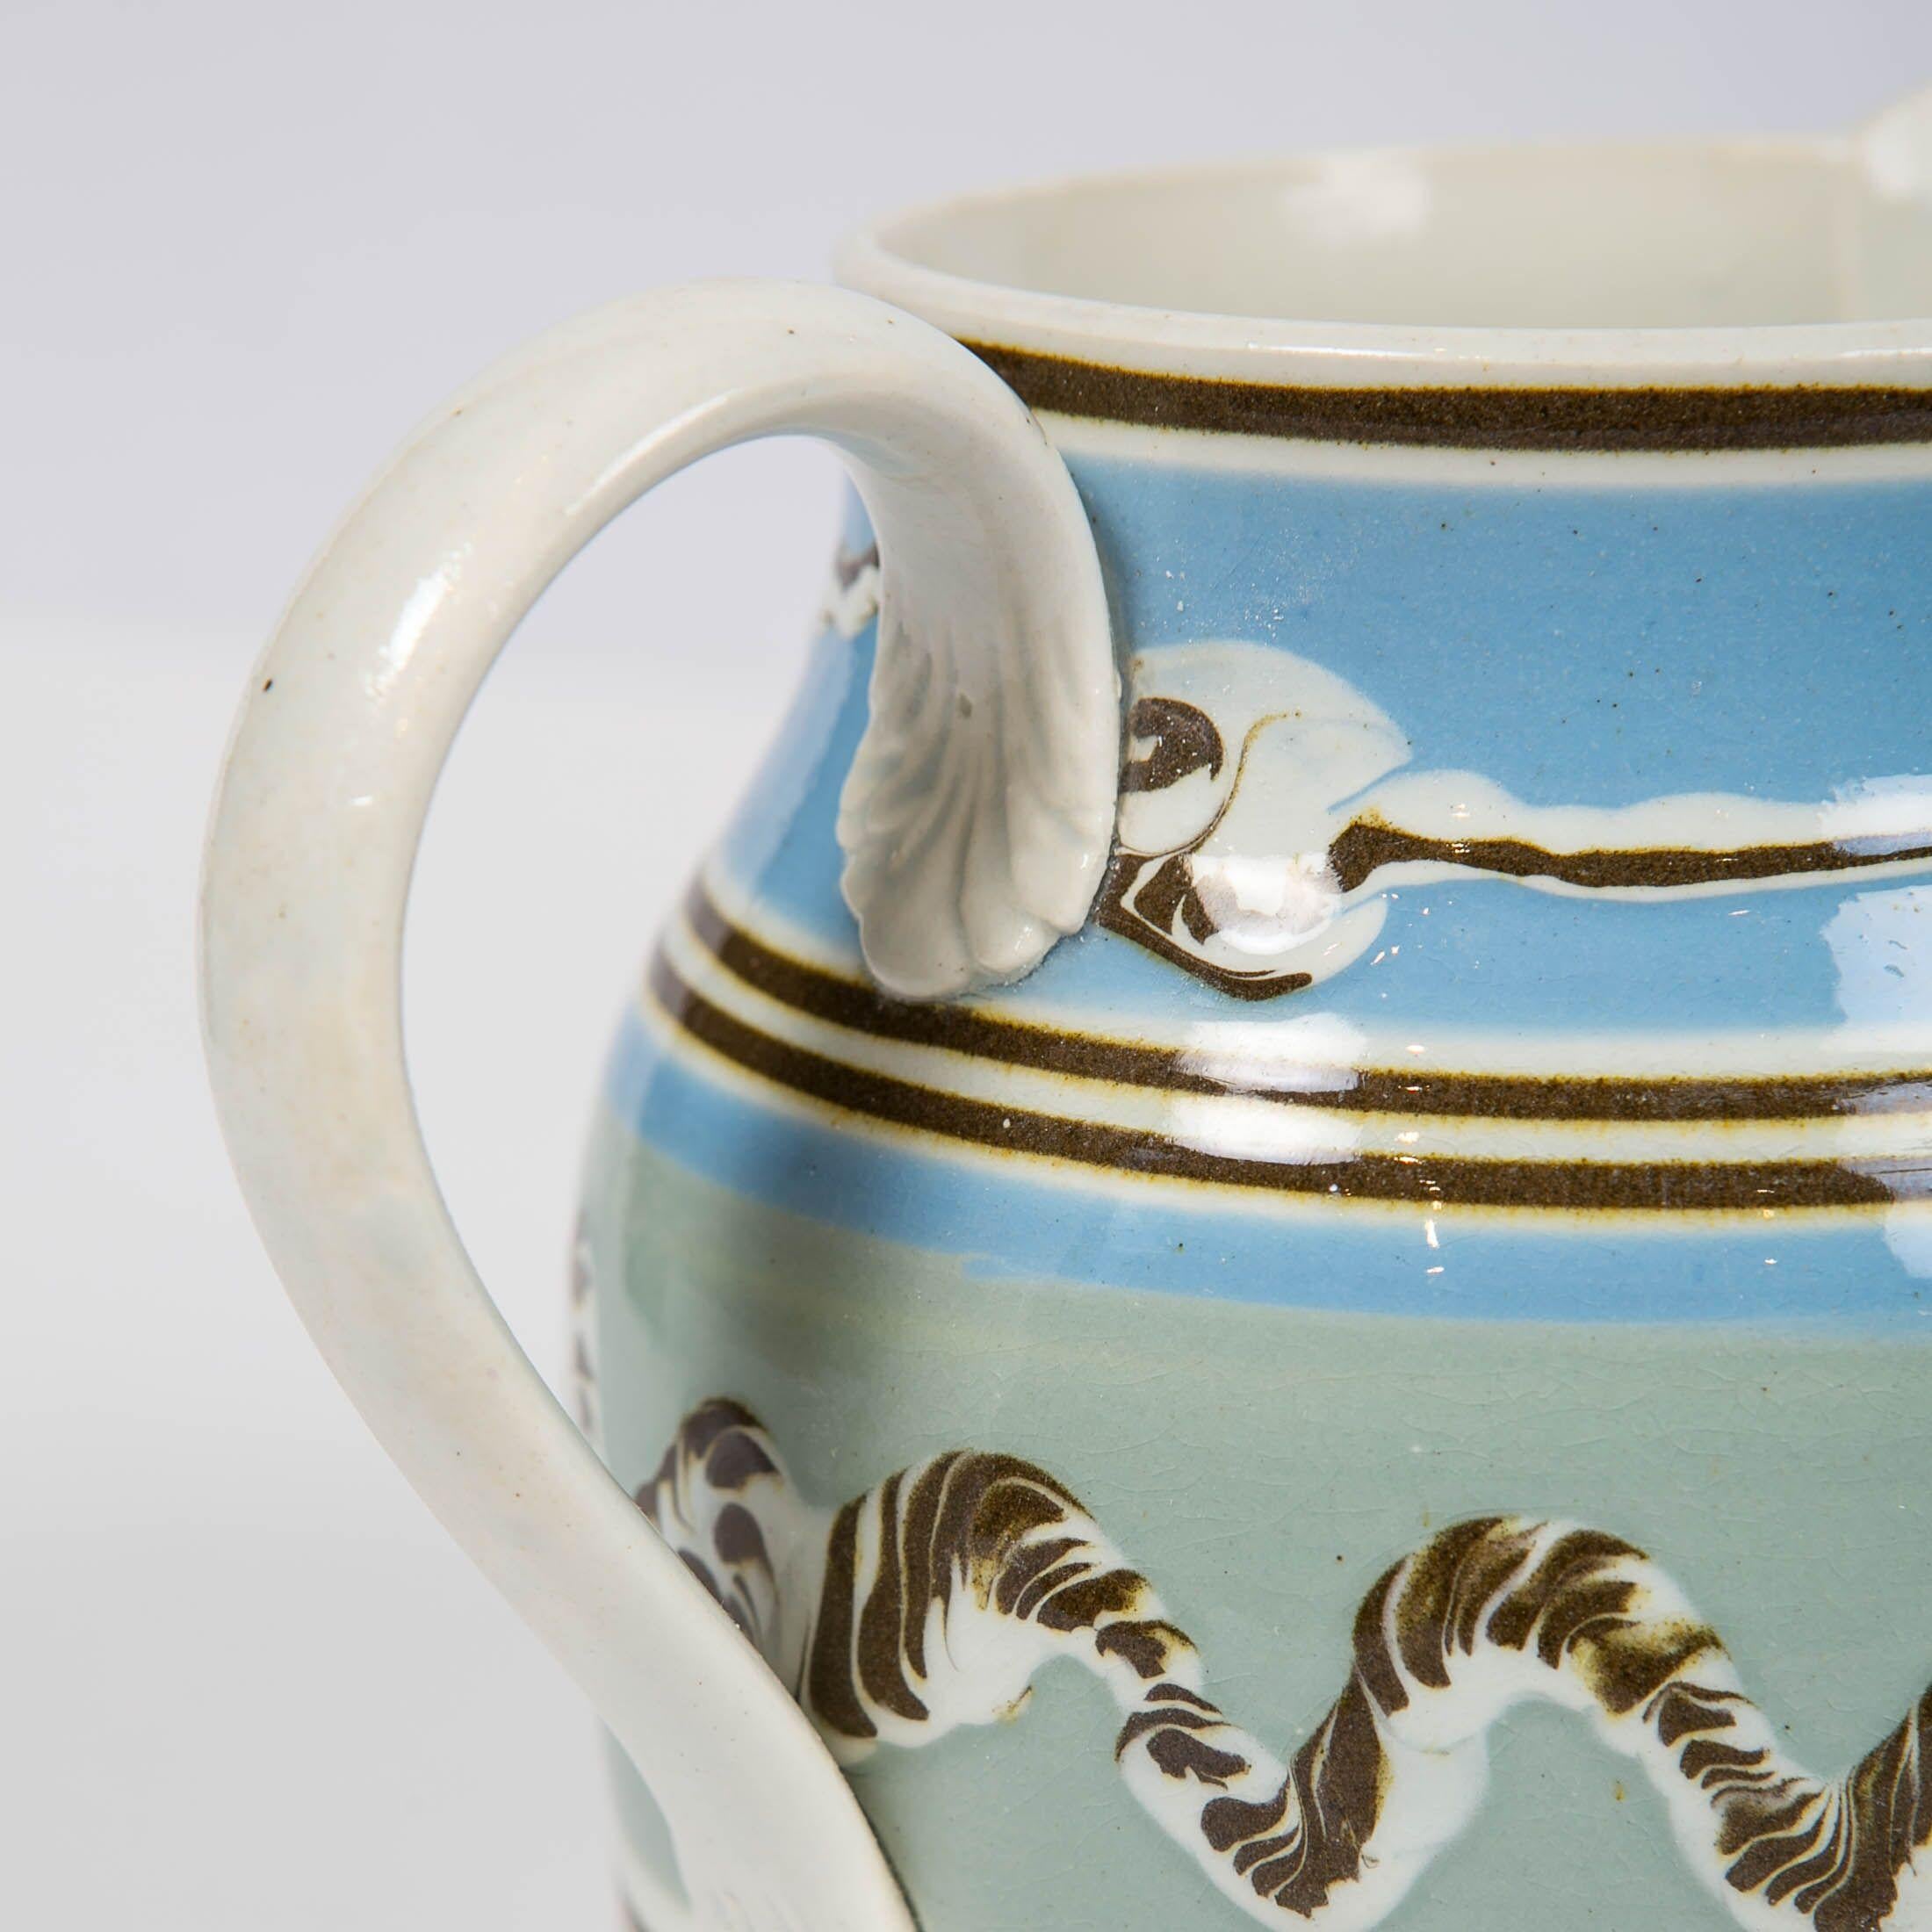 A Mochaware pitcher made of pearl-glazed creamware in England, circa 1820. The pitcher is decorated with bands of baby blue and moss green slip and thin bands of black slip. The handle has acanthus leaf terminals.
The most notable features are the